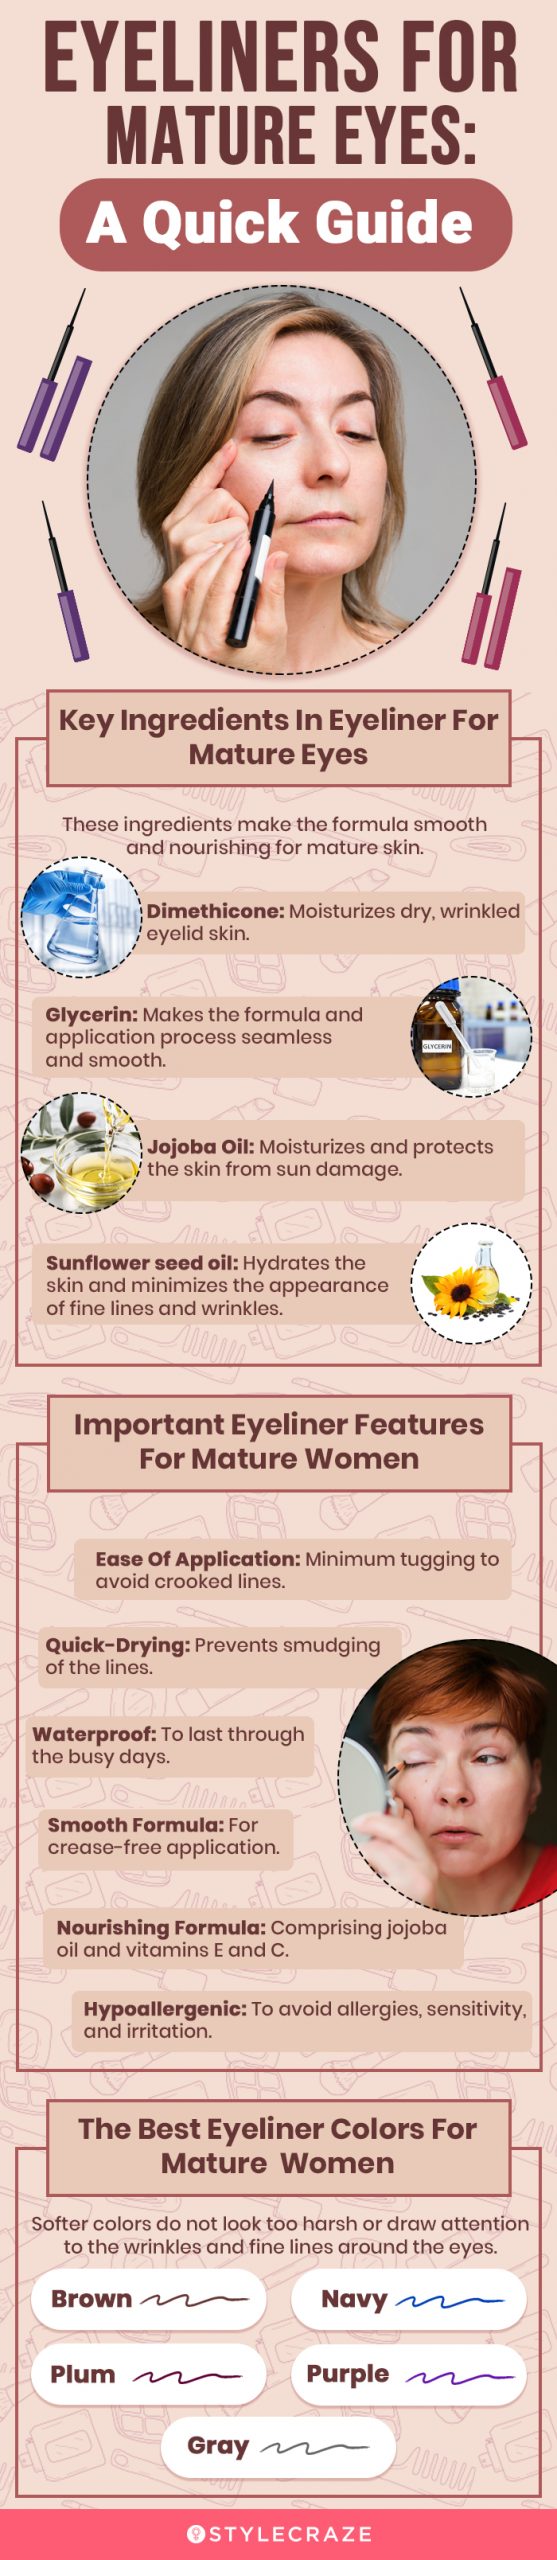 Eyeliners For Mature Eyes: A Quick Guide [infographic]